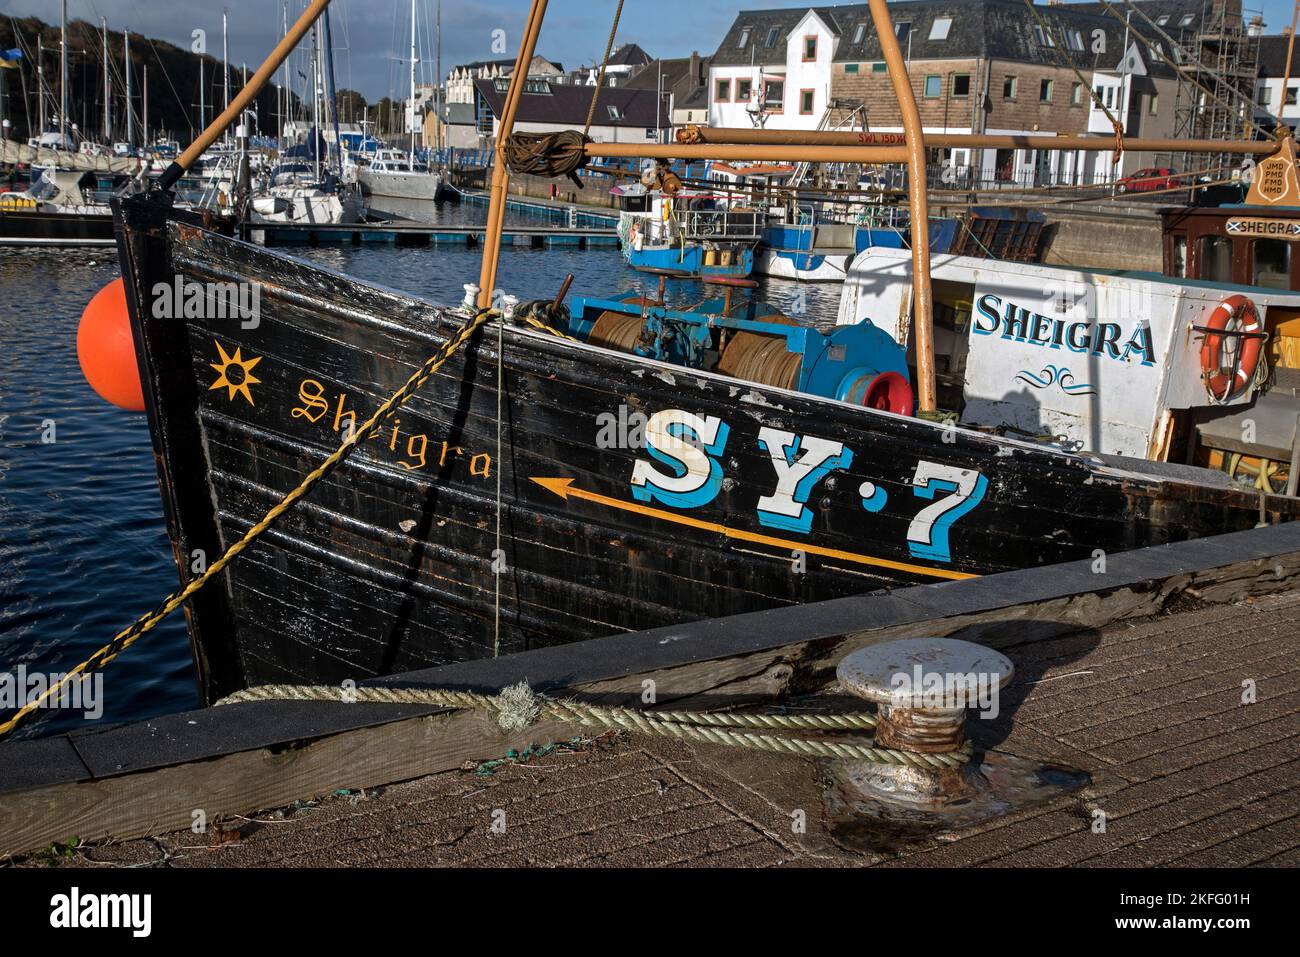 Sheigra SY7 fishing boat moored in Stornoway Harbour, Isle of Lewis, Outer Hebrides, Scotland, UK. Stock Photo